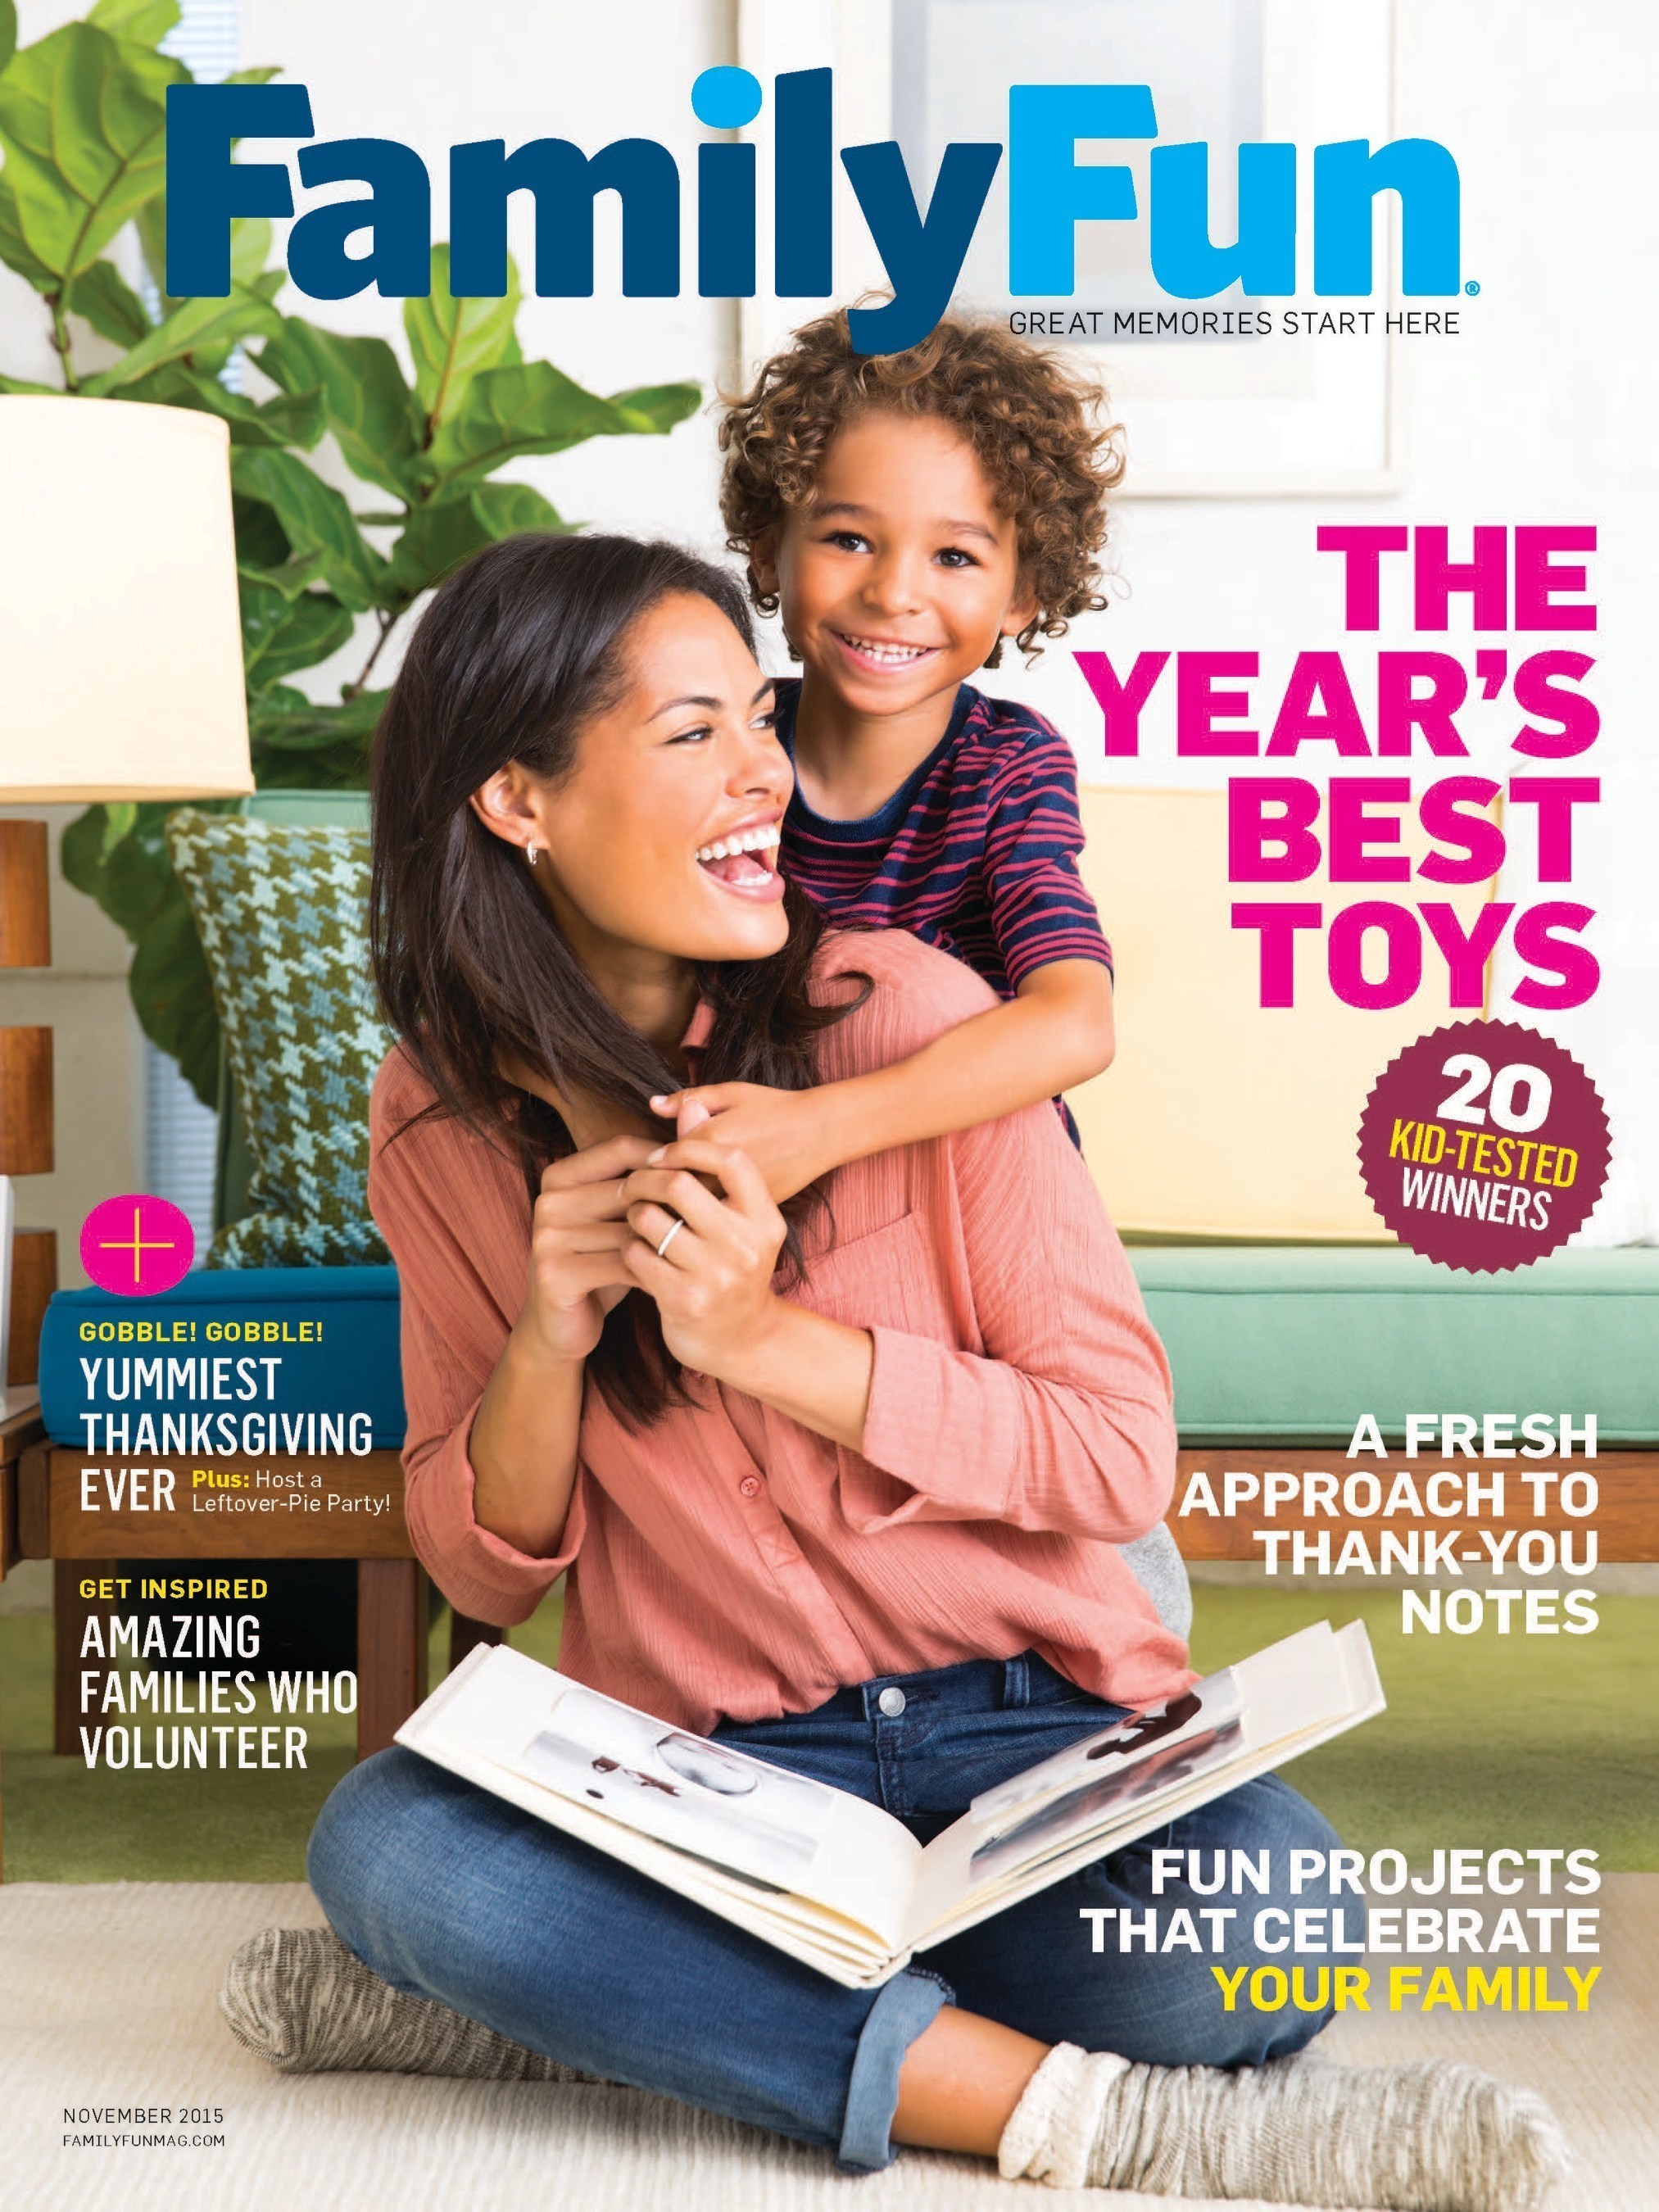 FamilyFun Magazine announces 24th annual, kid-tested Toy of the Year Awards with 20 gifts that inspire creativity, strategy, and imaginative play